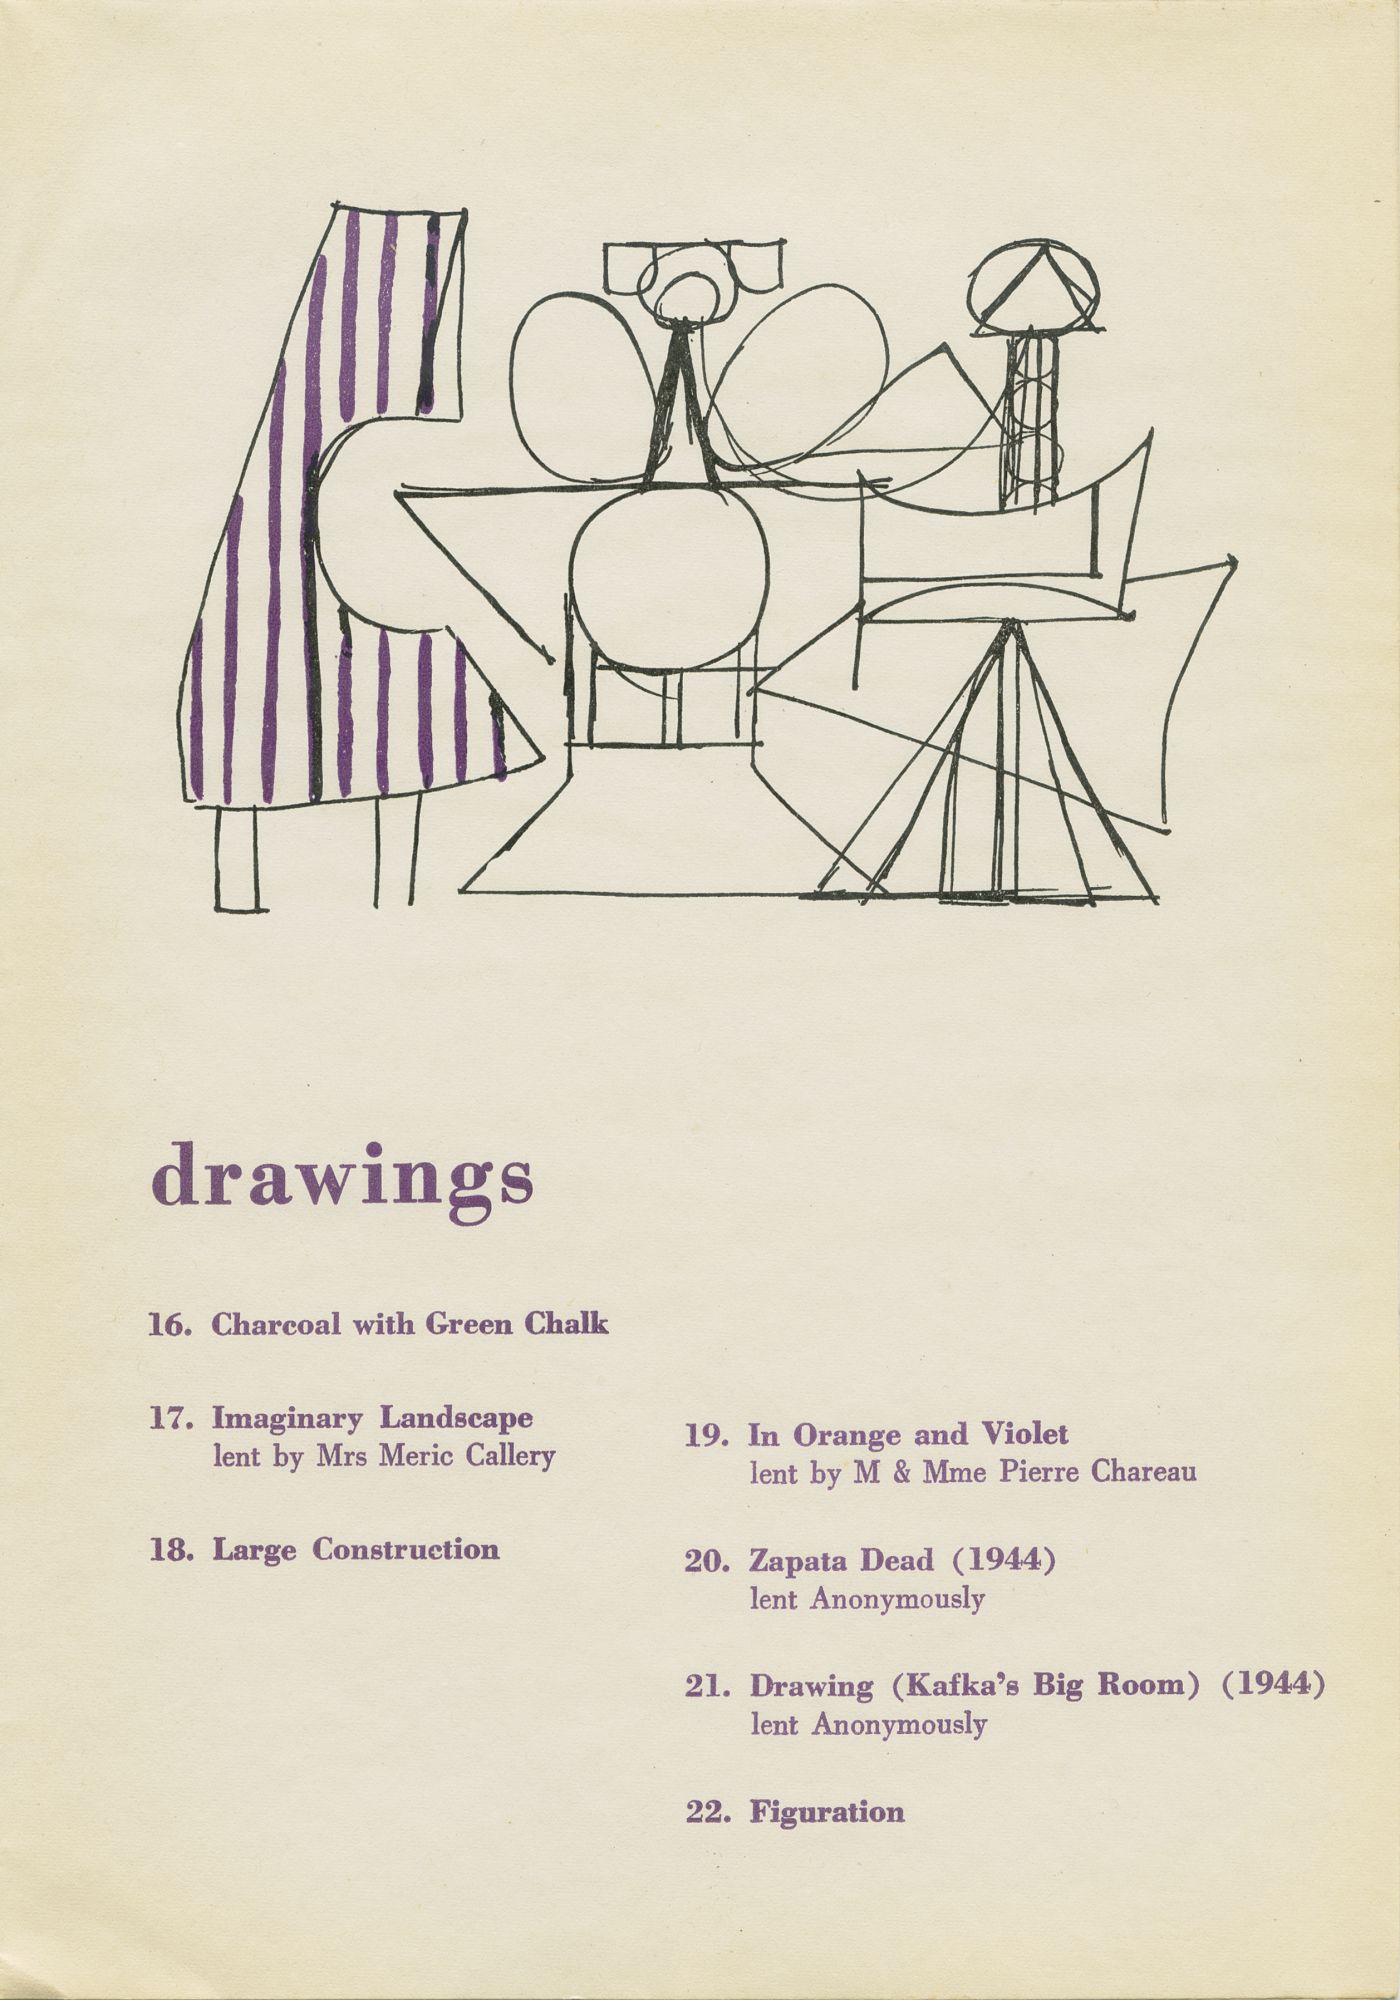 Untitled, 1945, illustrated in the catalogue for Motherwell’s 1946 solo exhibition at the Samuel M. Kootz Gallery, New York